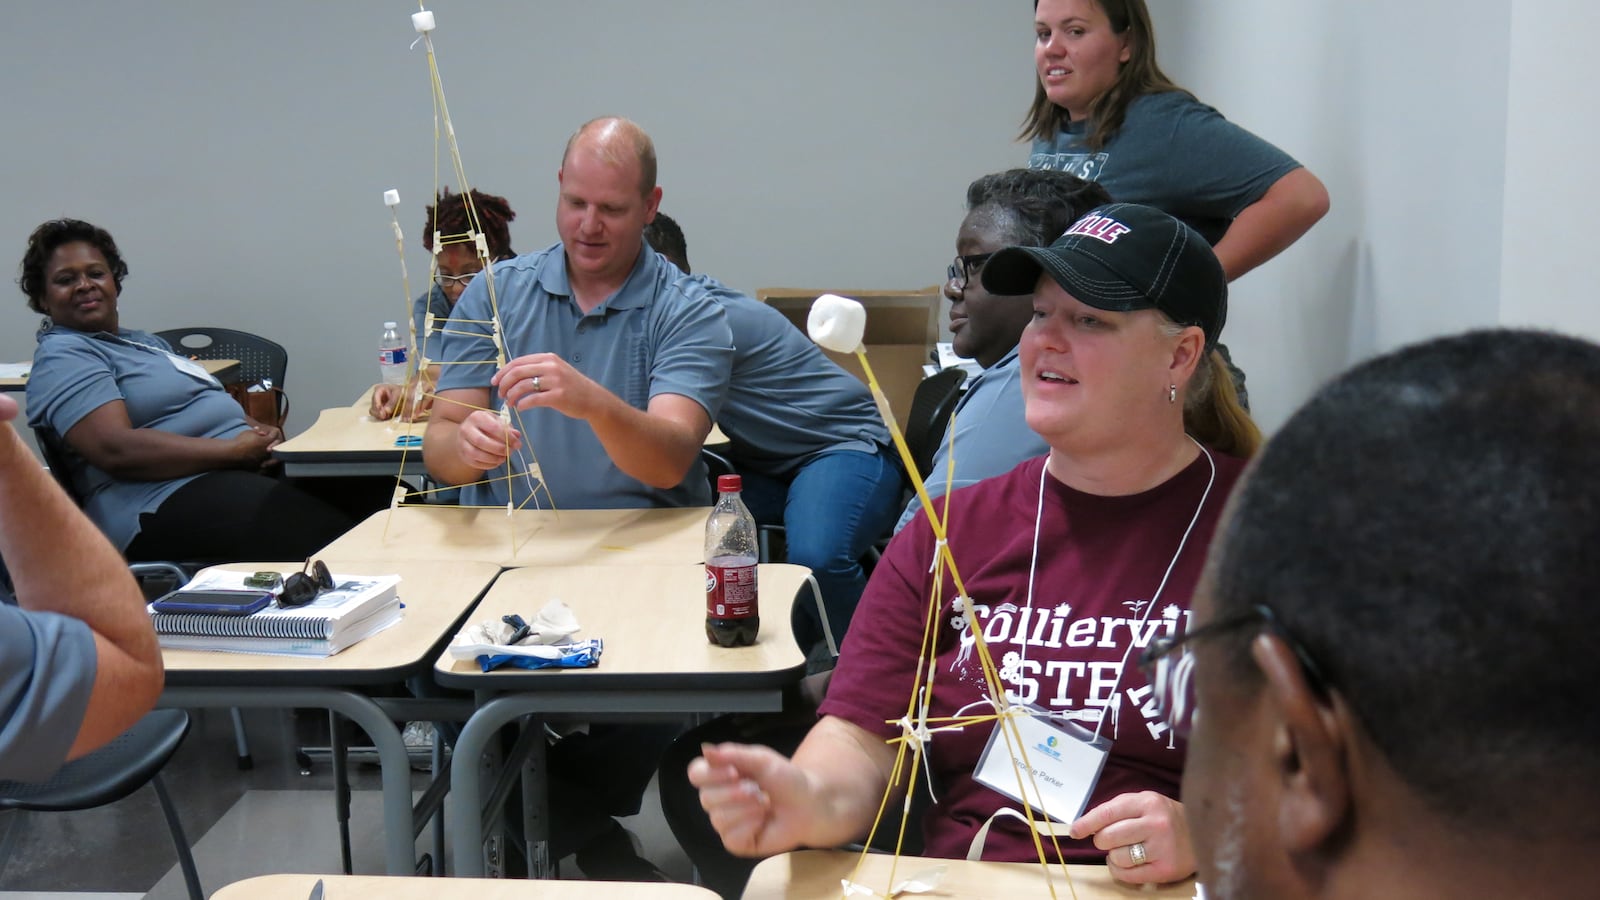 Collierville High School biology teacher Brooke Parker (center) constructs a tower using spaghetti strings during an ASM Materials Camp at Southwest Tennessee Community College in Memphis.